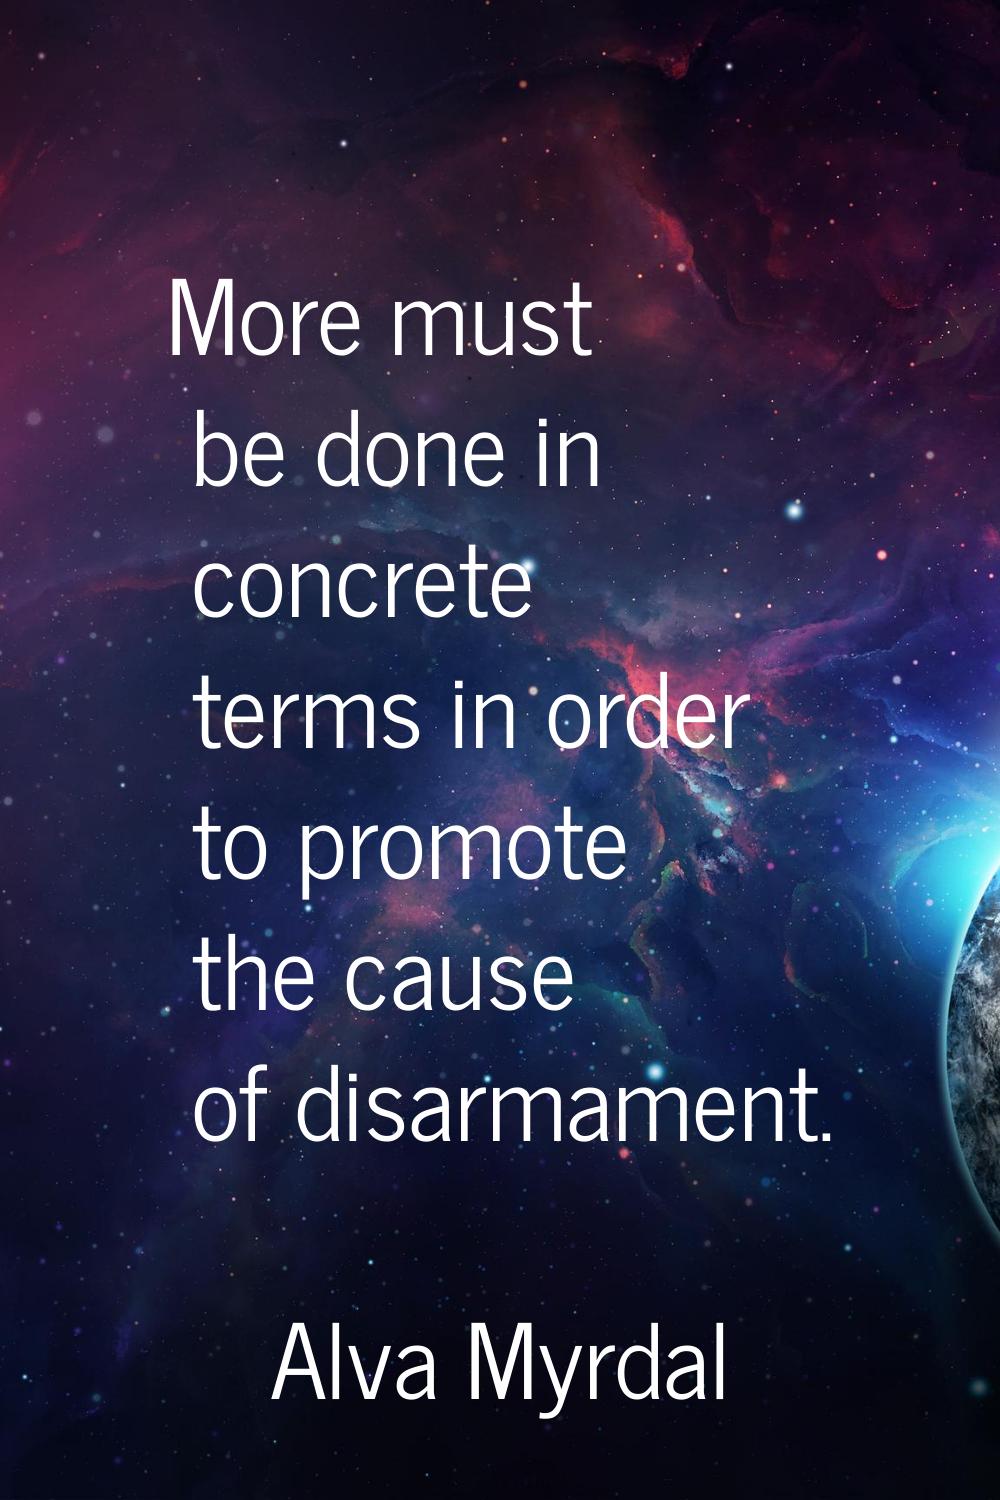 More must be done in concrete terms in order to promote the cause of disarmament.